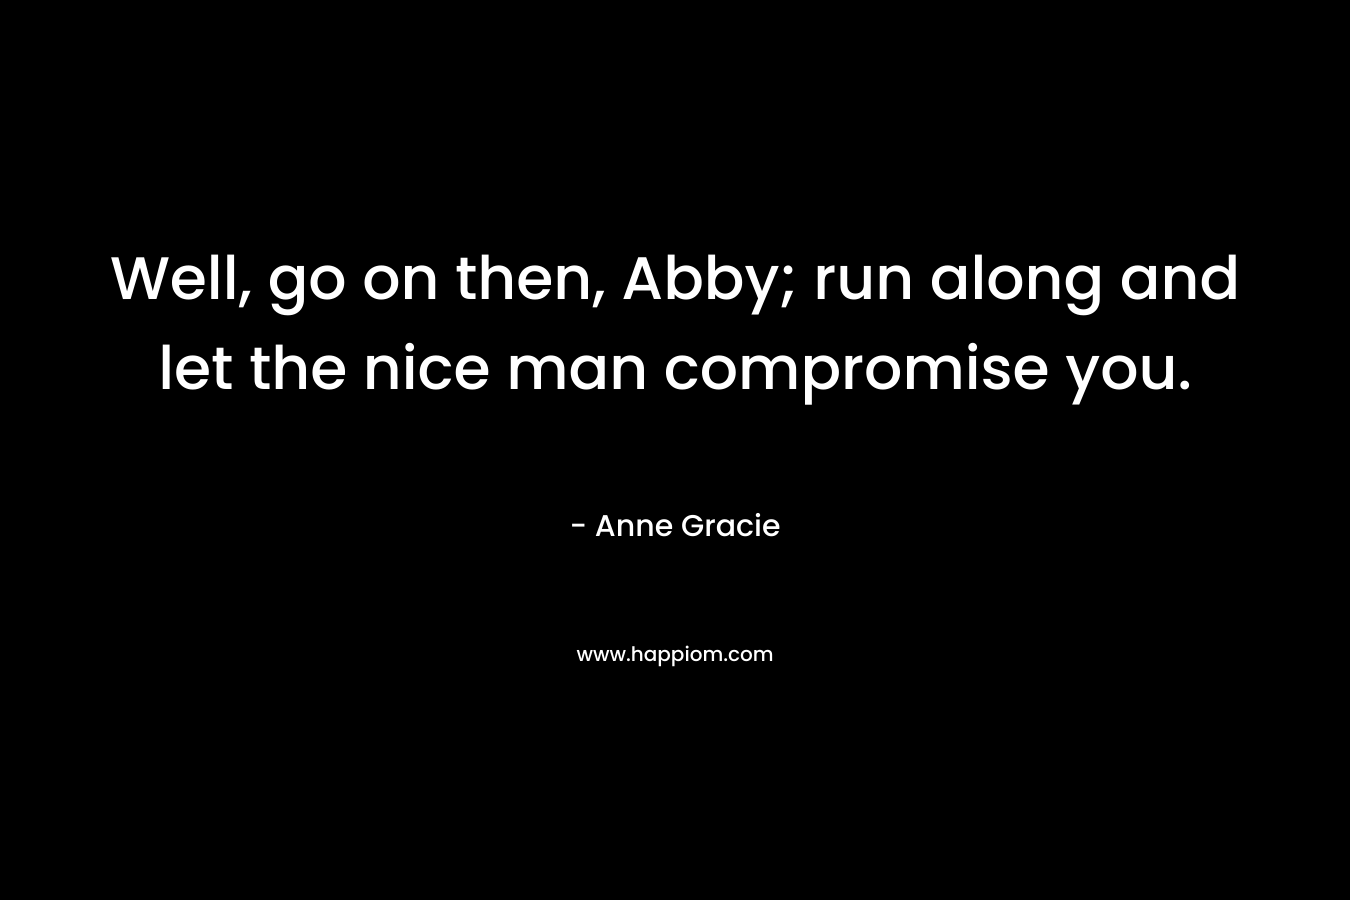 Well, go on then, Abby; run along and let the nice man compromise you.